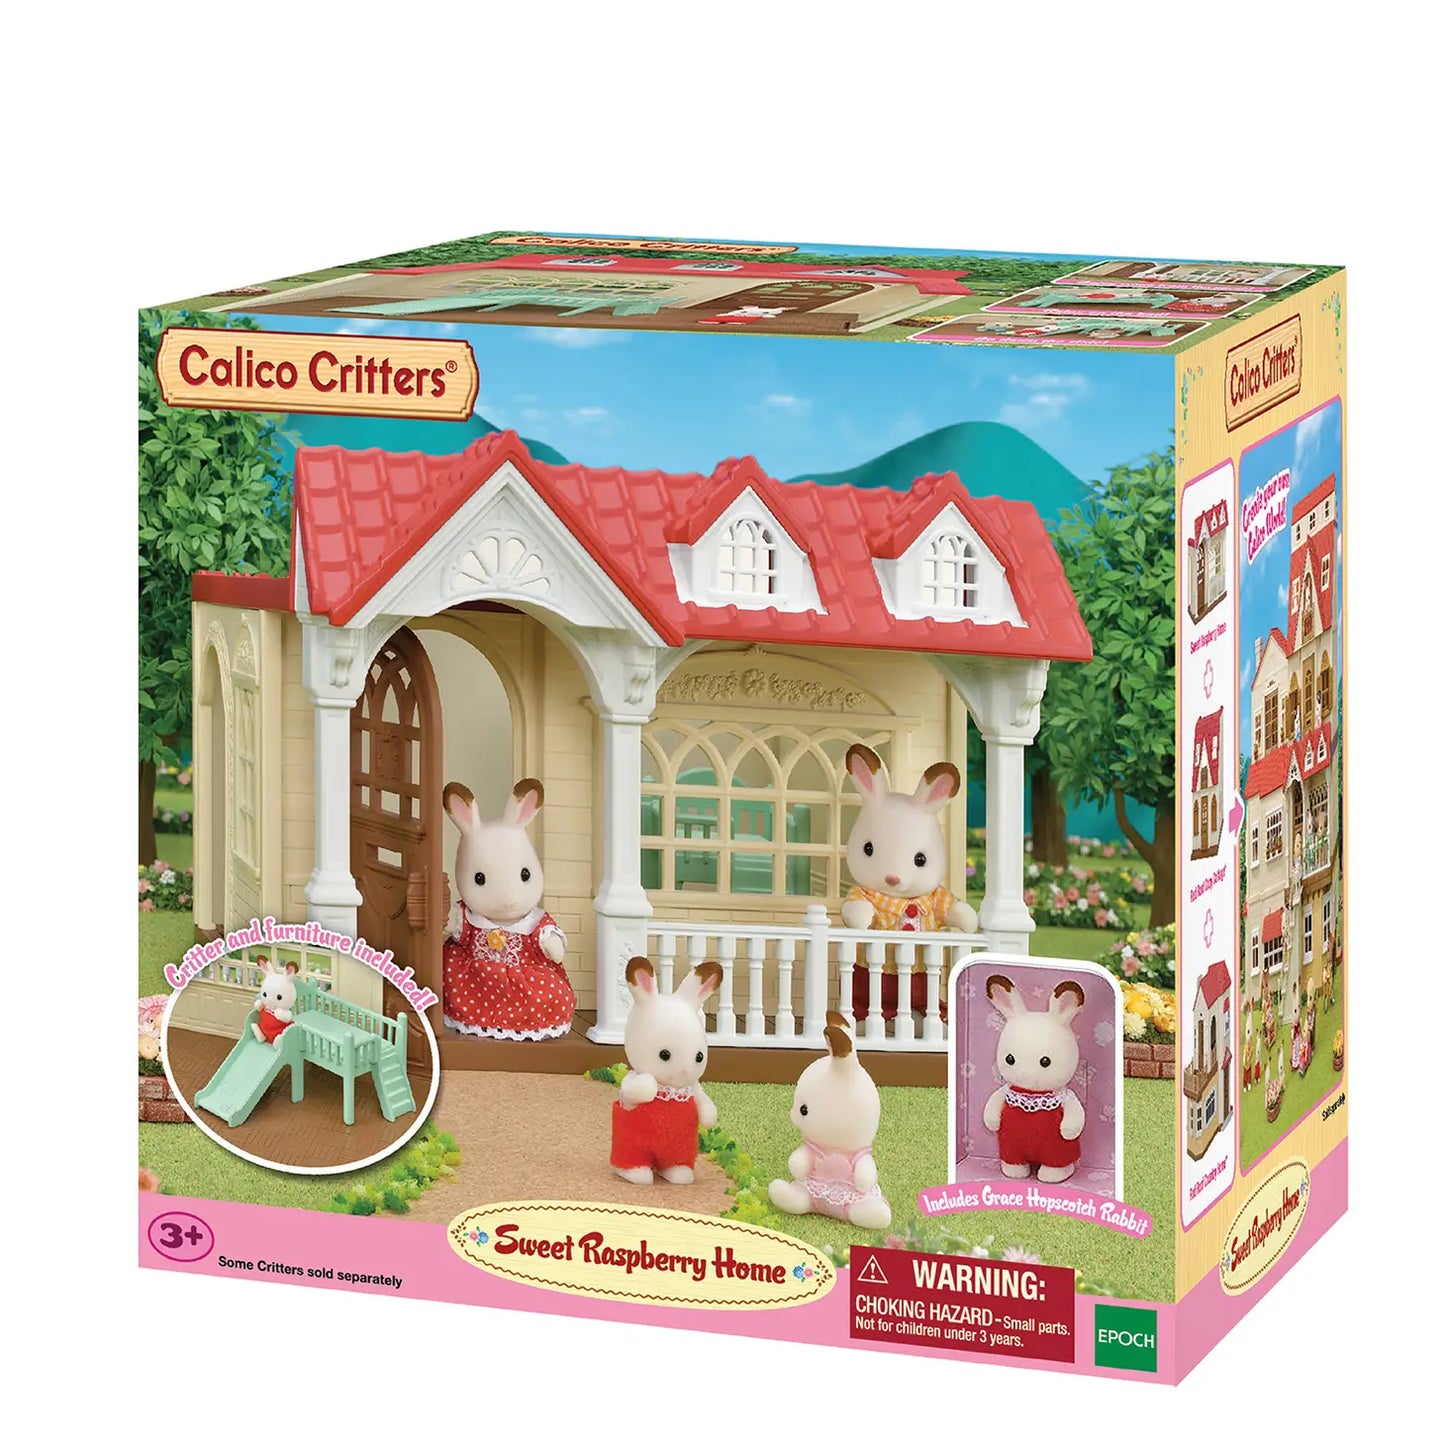 Calico Critters Sweet Raspberry Home Playset